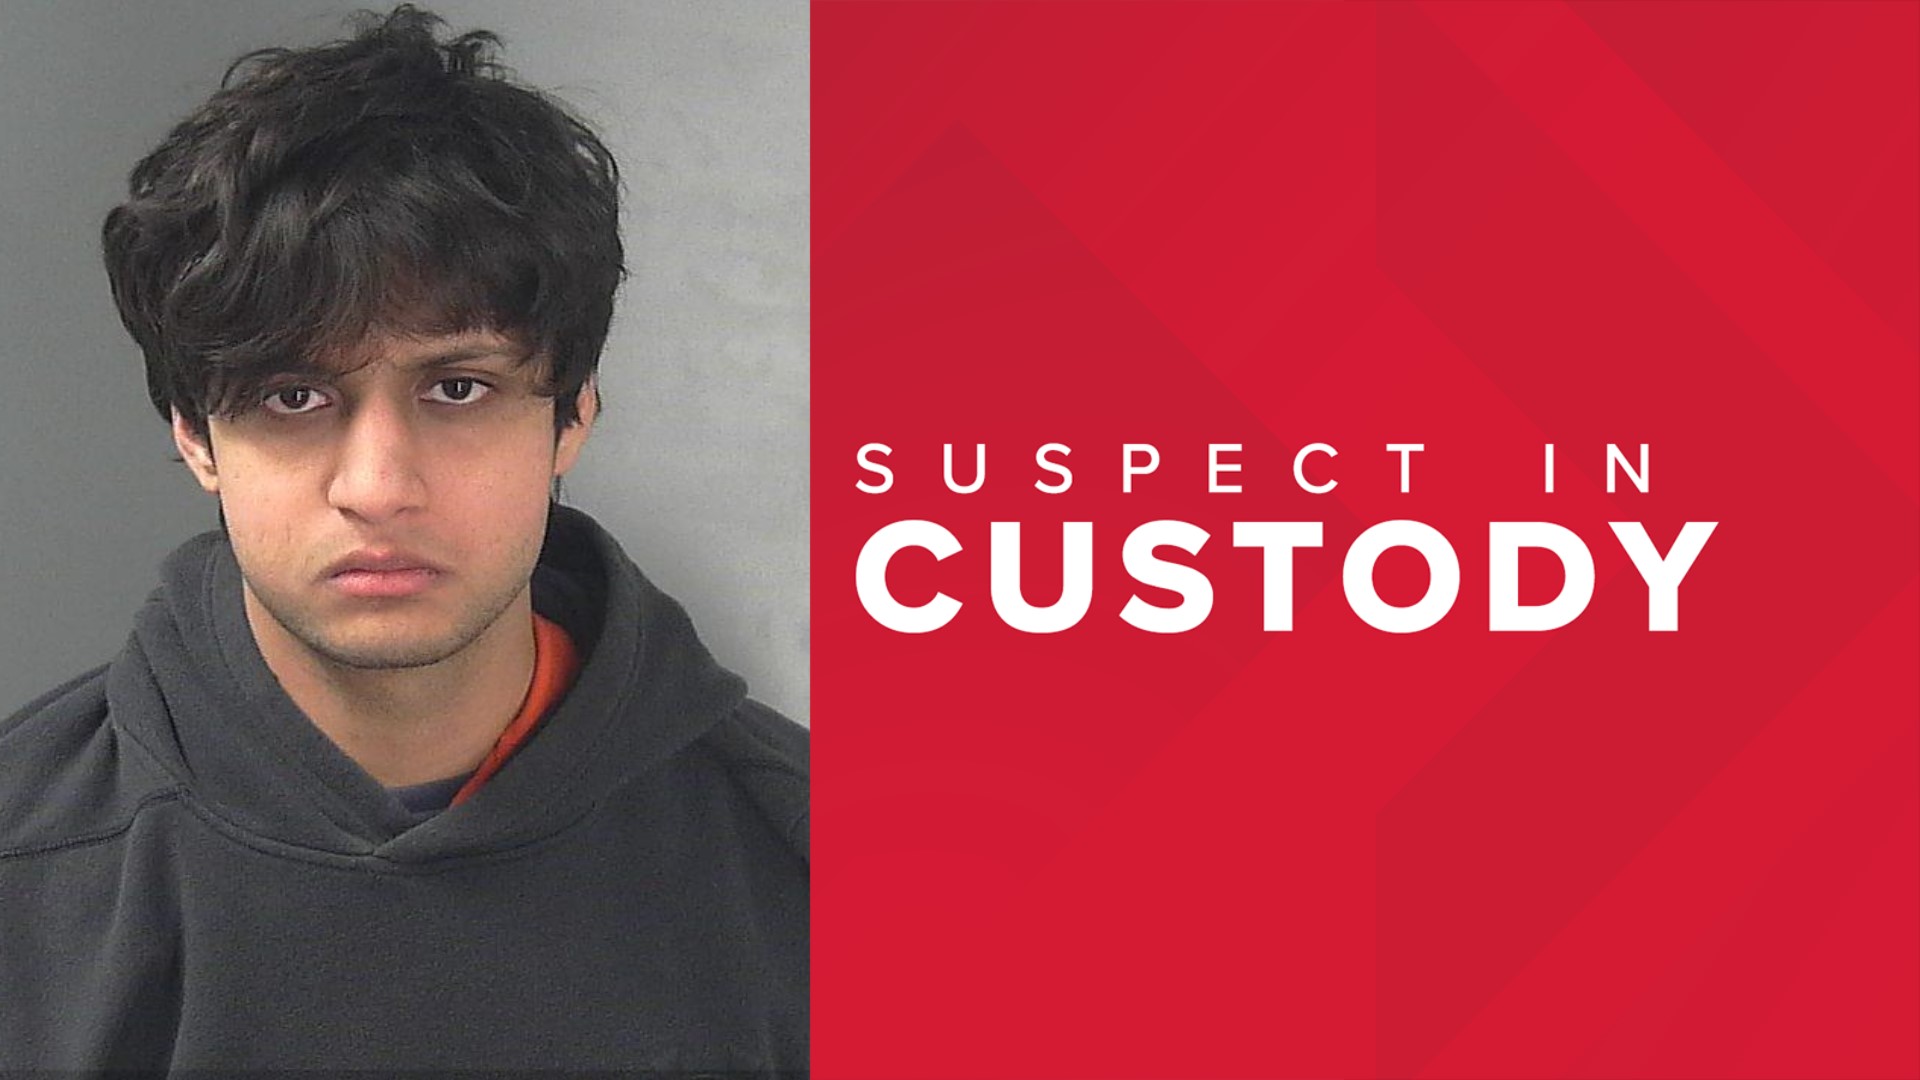 The female student told police she went into Kalp Patel's room when she thought she heard someone in distress.